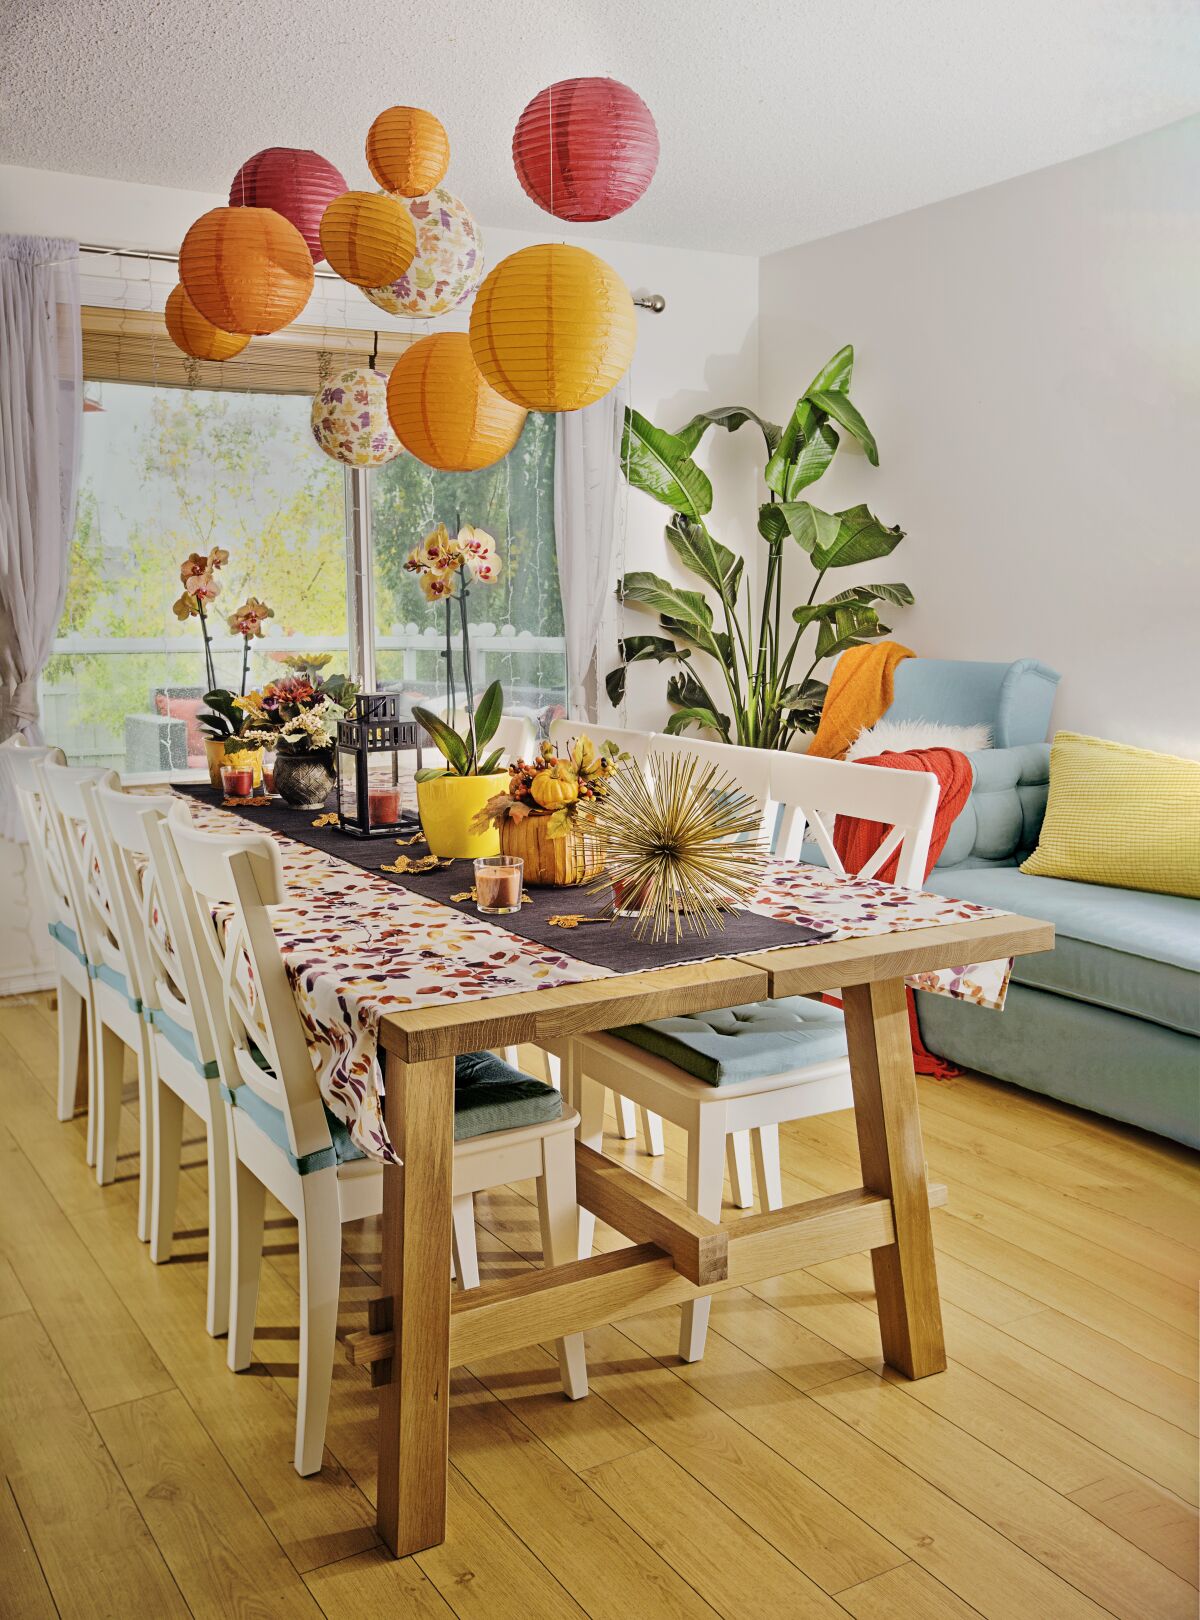 A dining room with a large table and couch for relaxed seating.